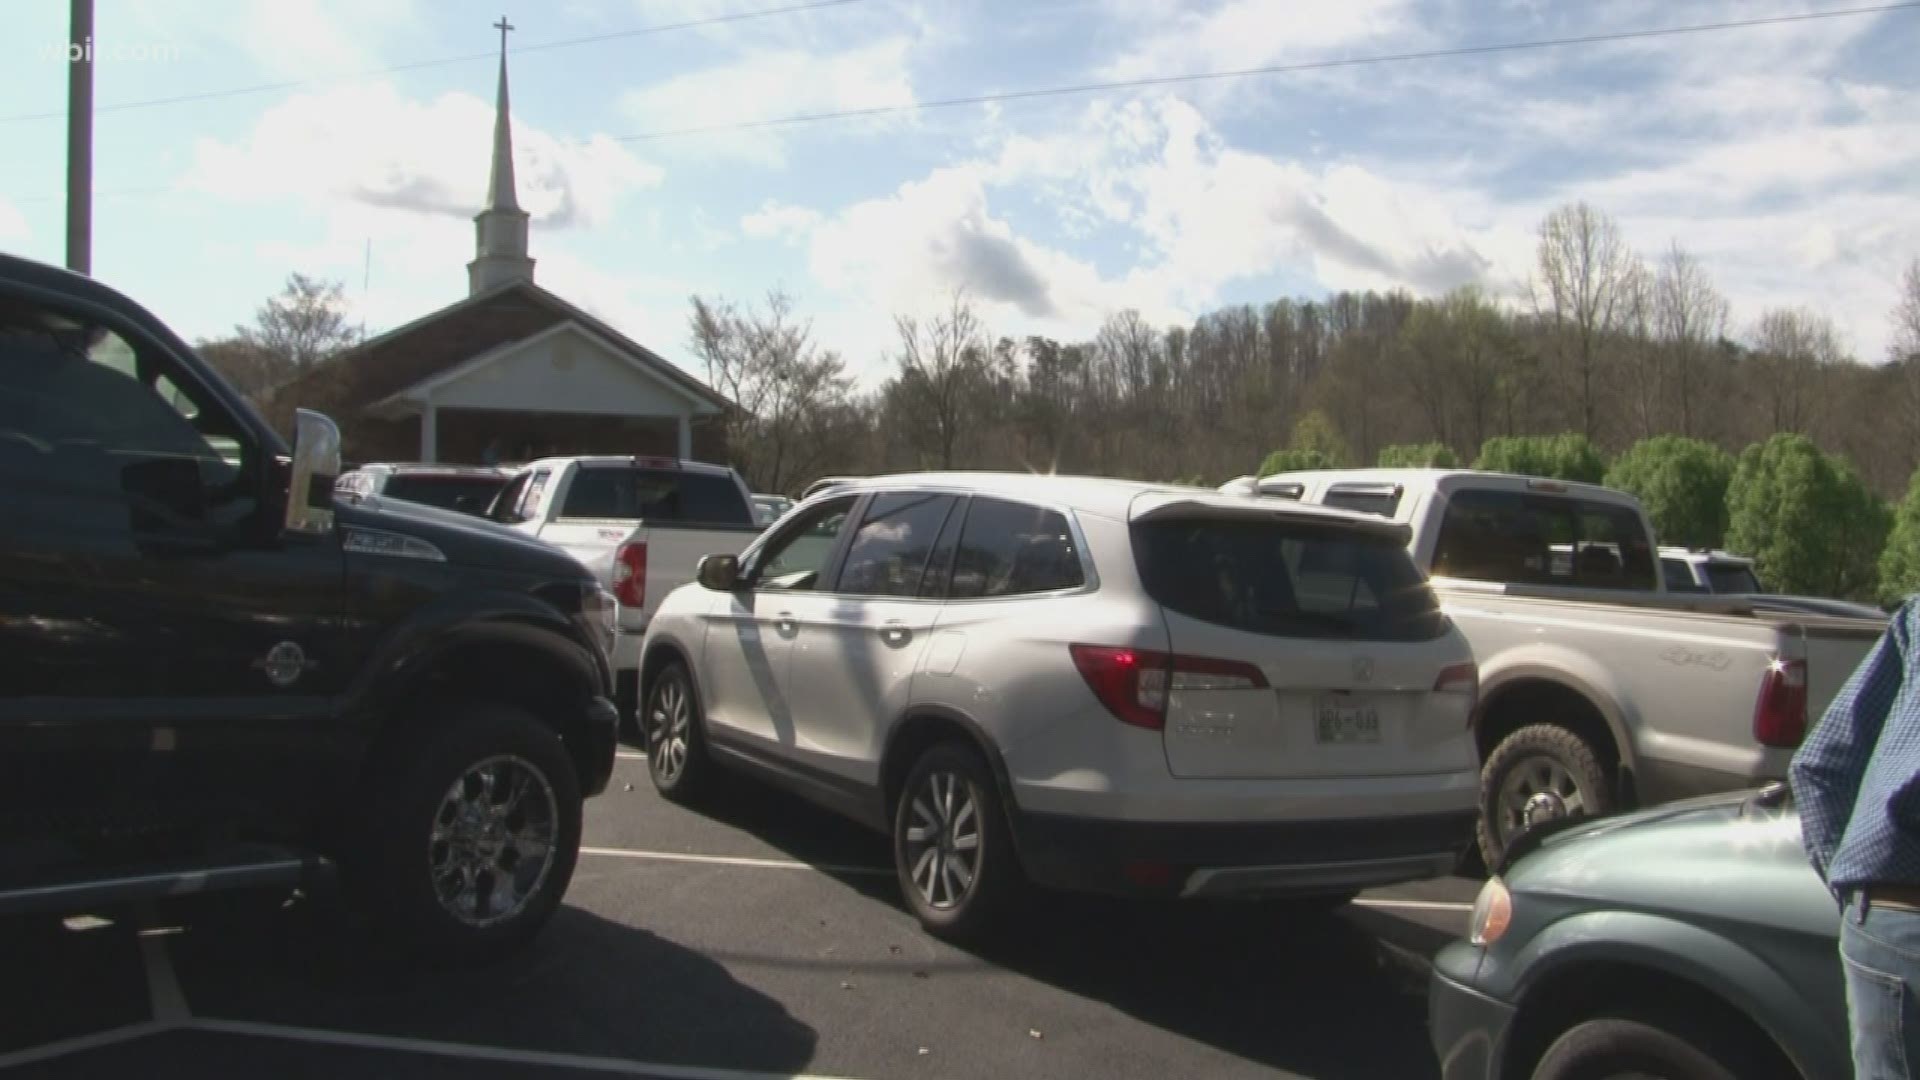 Churches are finding ways to worship from a safe distance. Many are doing online streams, and some are opting for a "drive-in" style service.